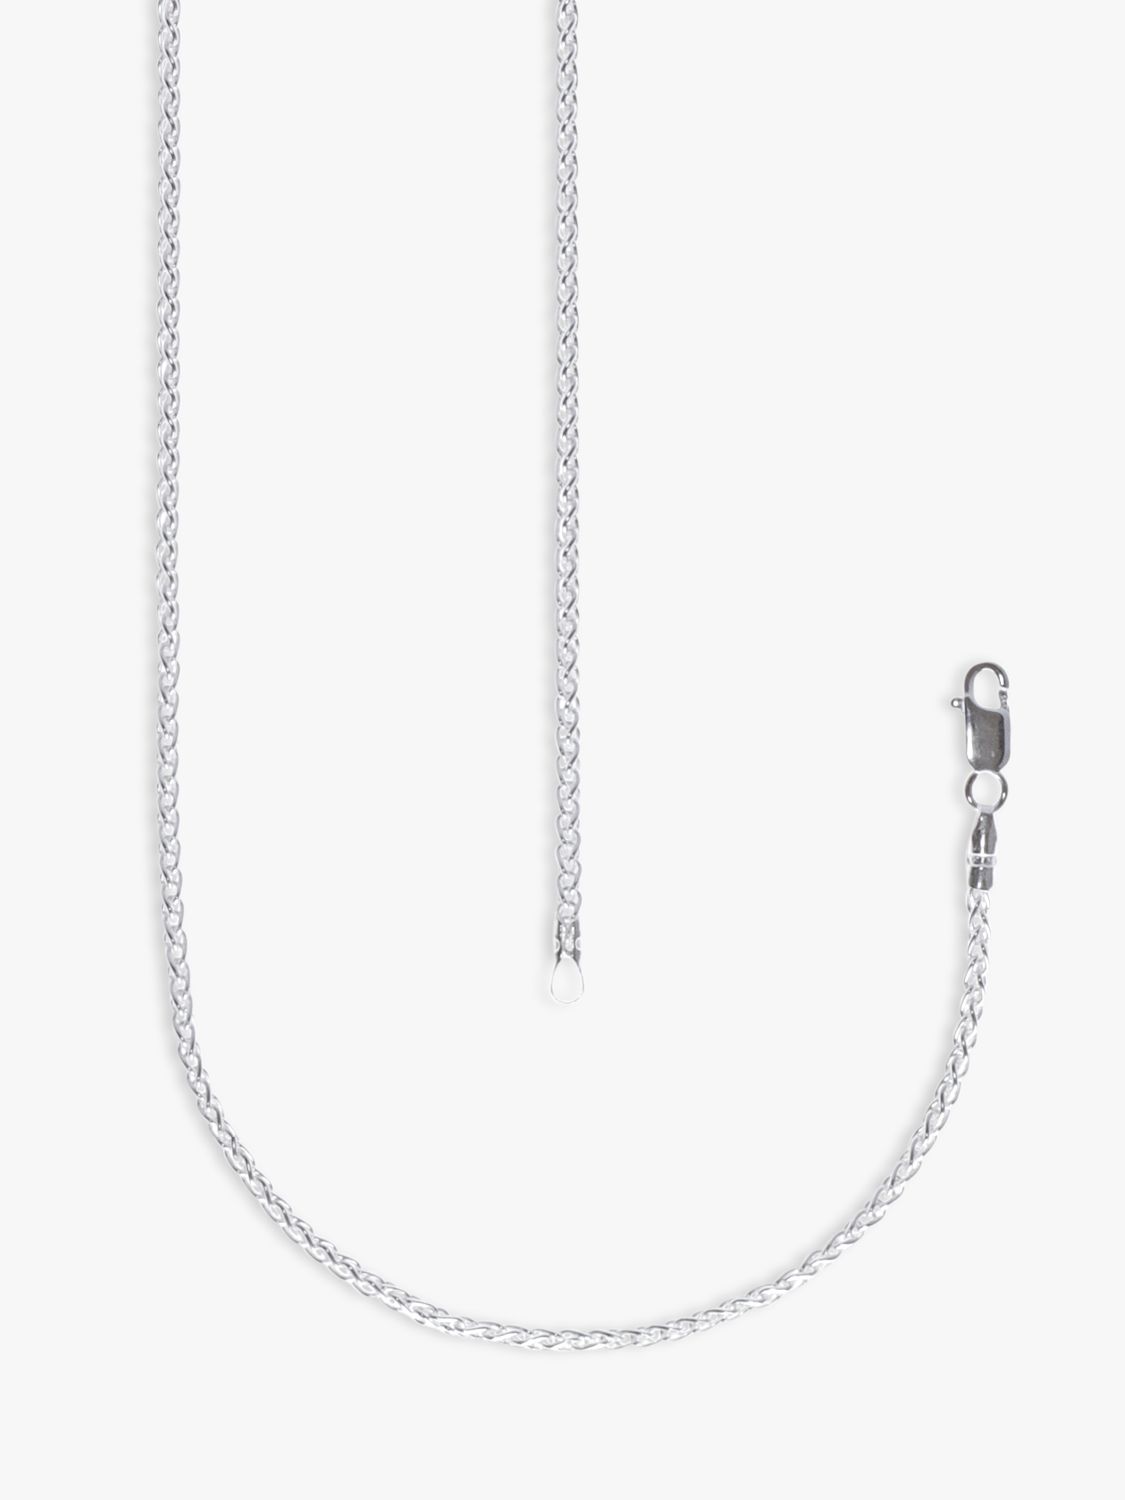 Nina B Small Sterling Silver Oval Locket Pendant Necklace, Silver at John  Lewis & Partners